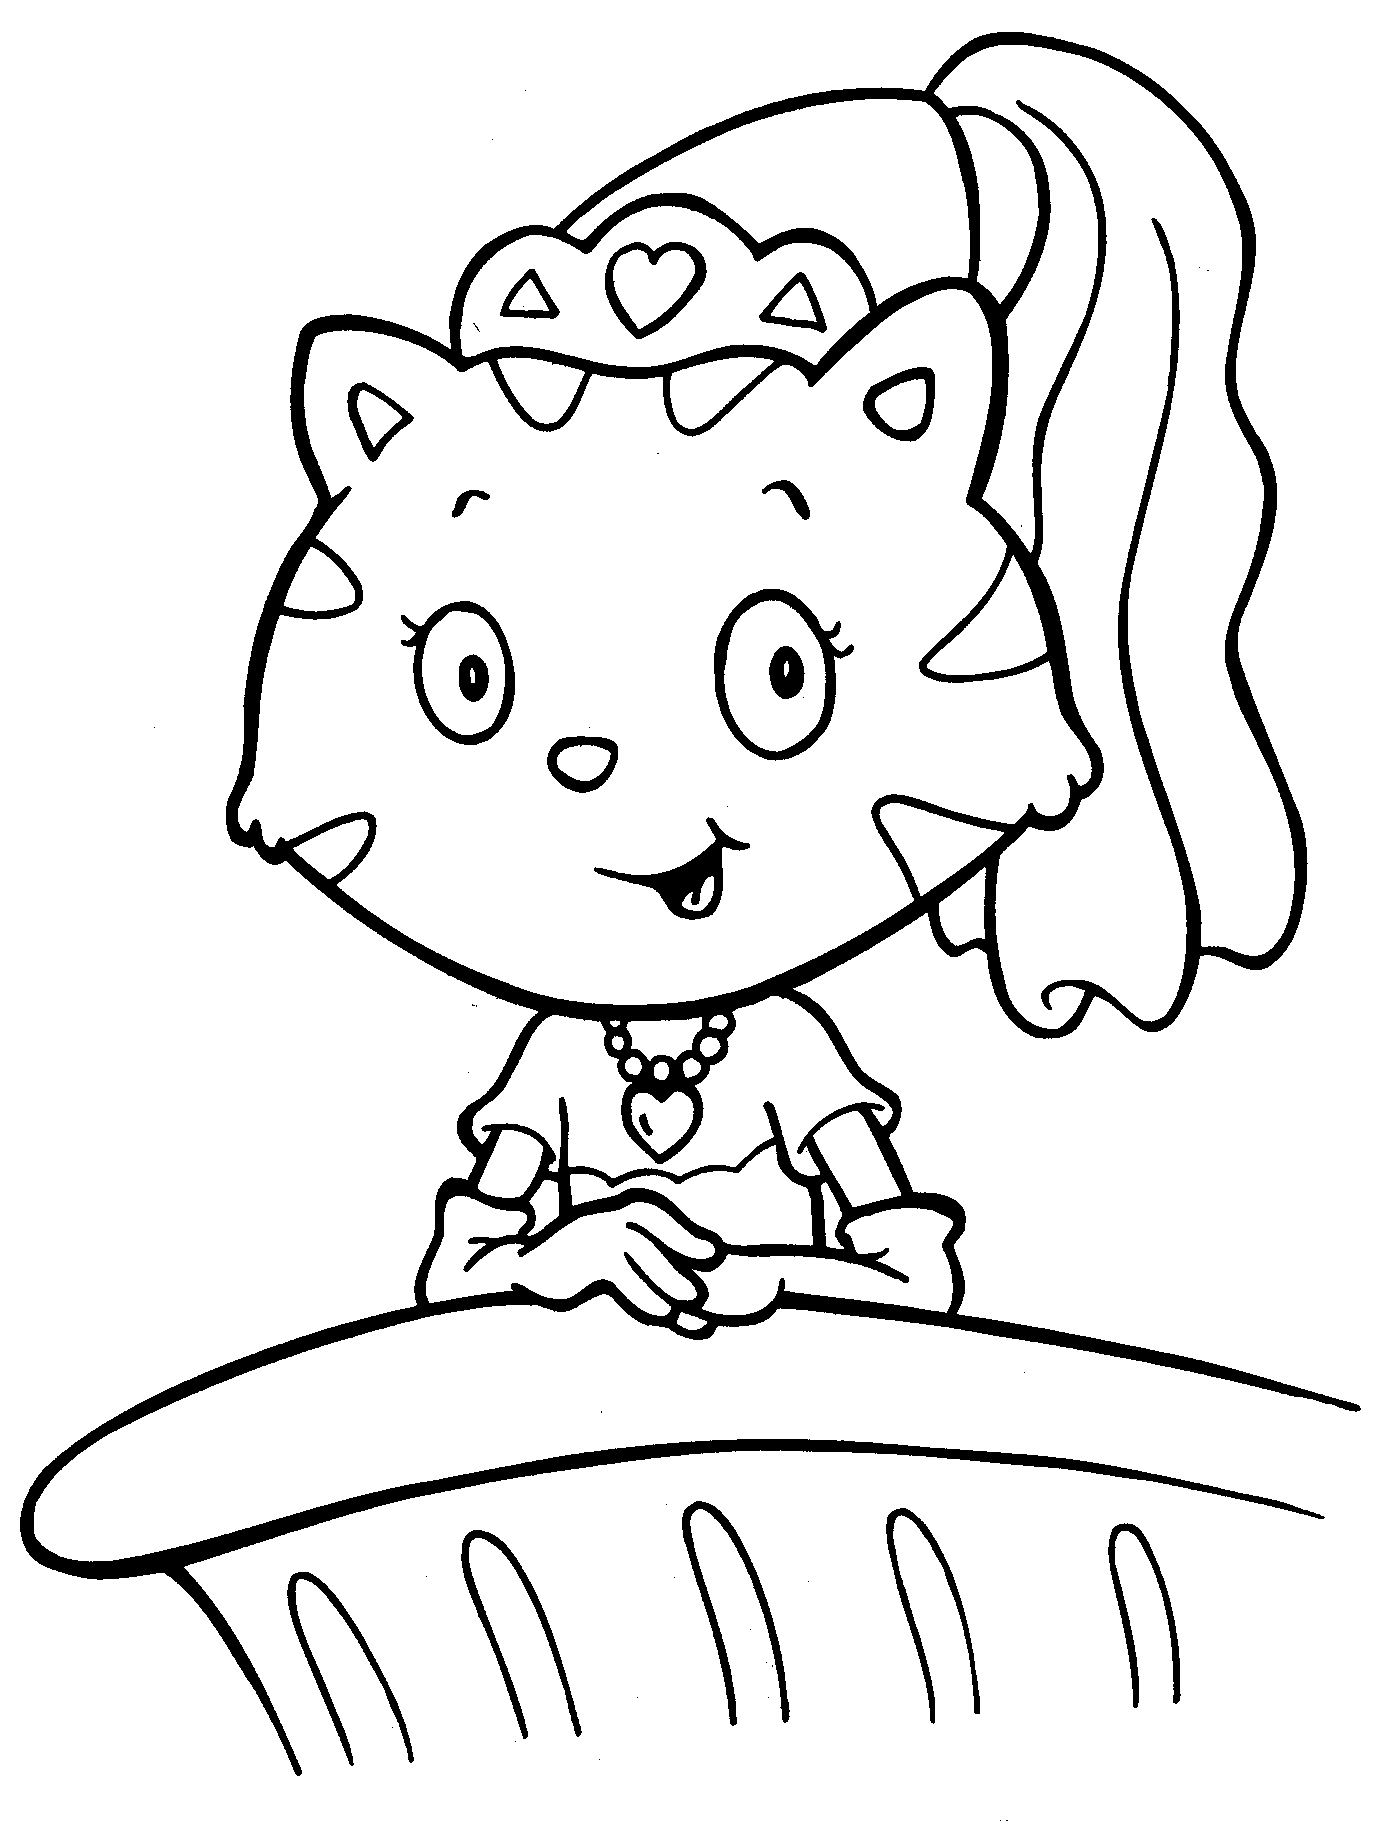 kitty cat coloring pages navishta sketch sweet cute angle cats cat coloring kitty pages 